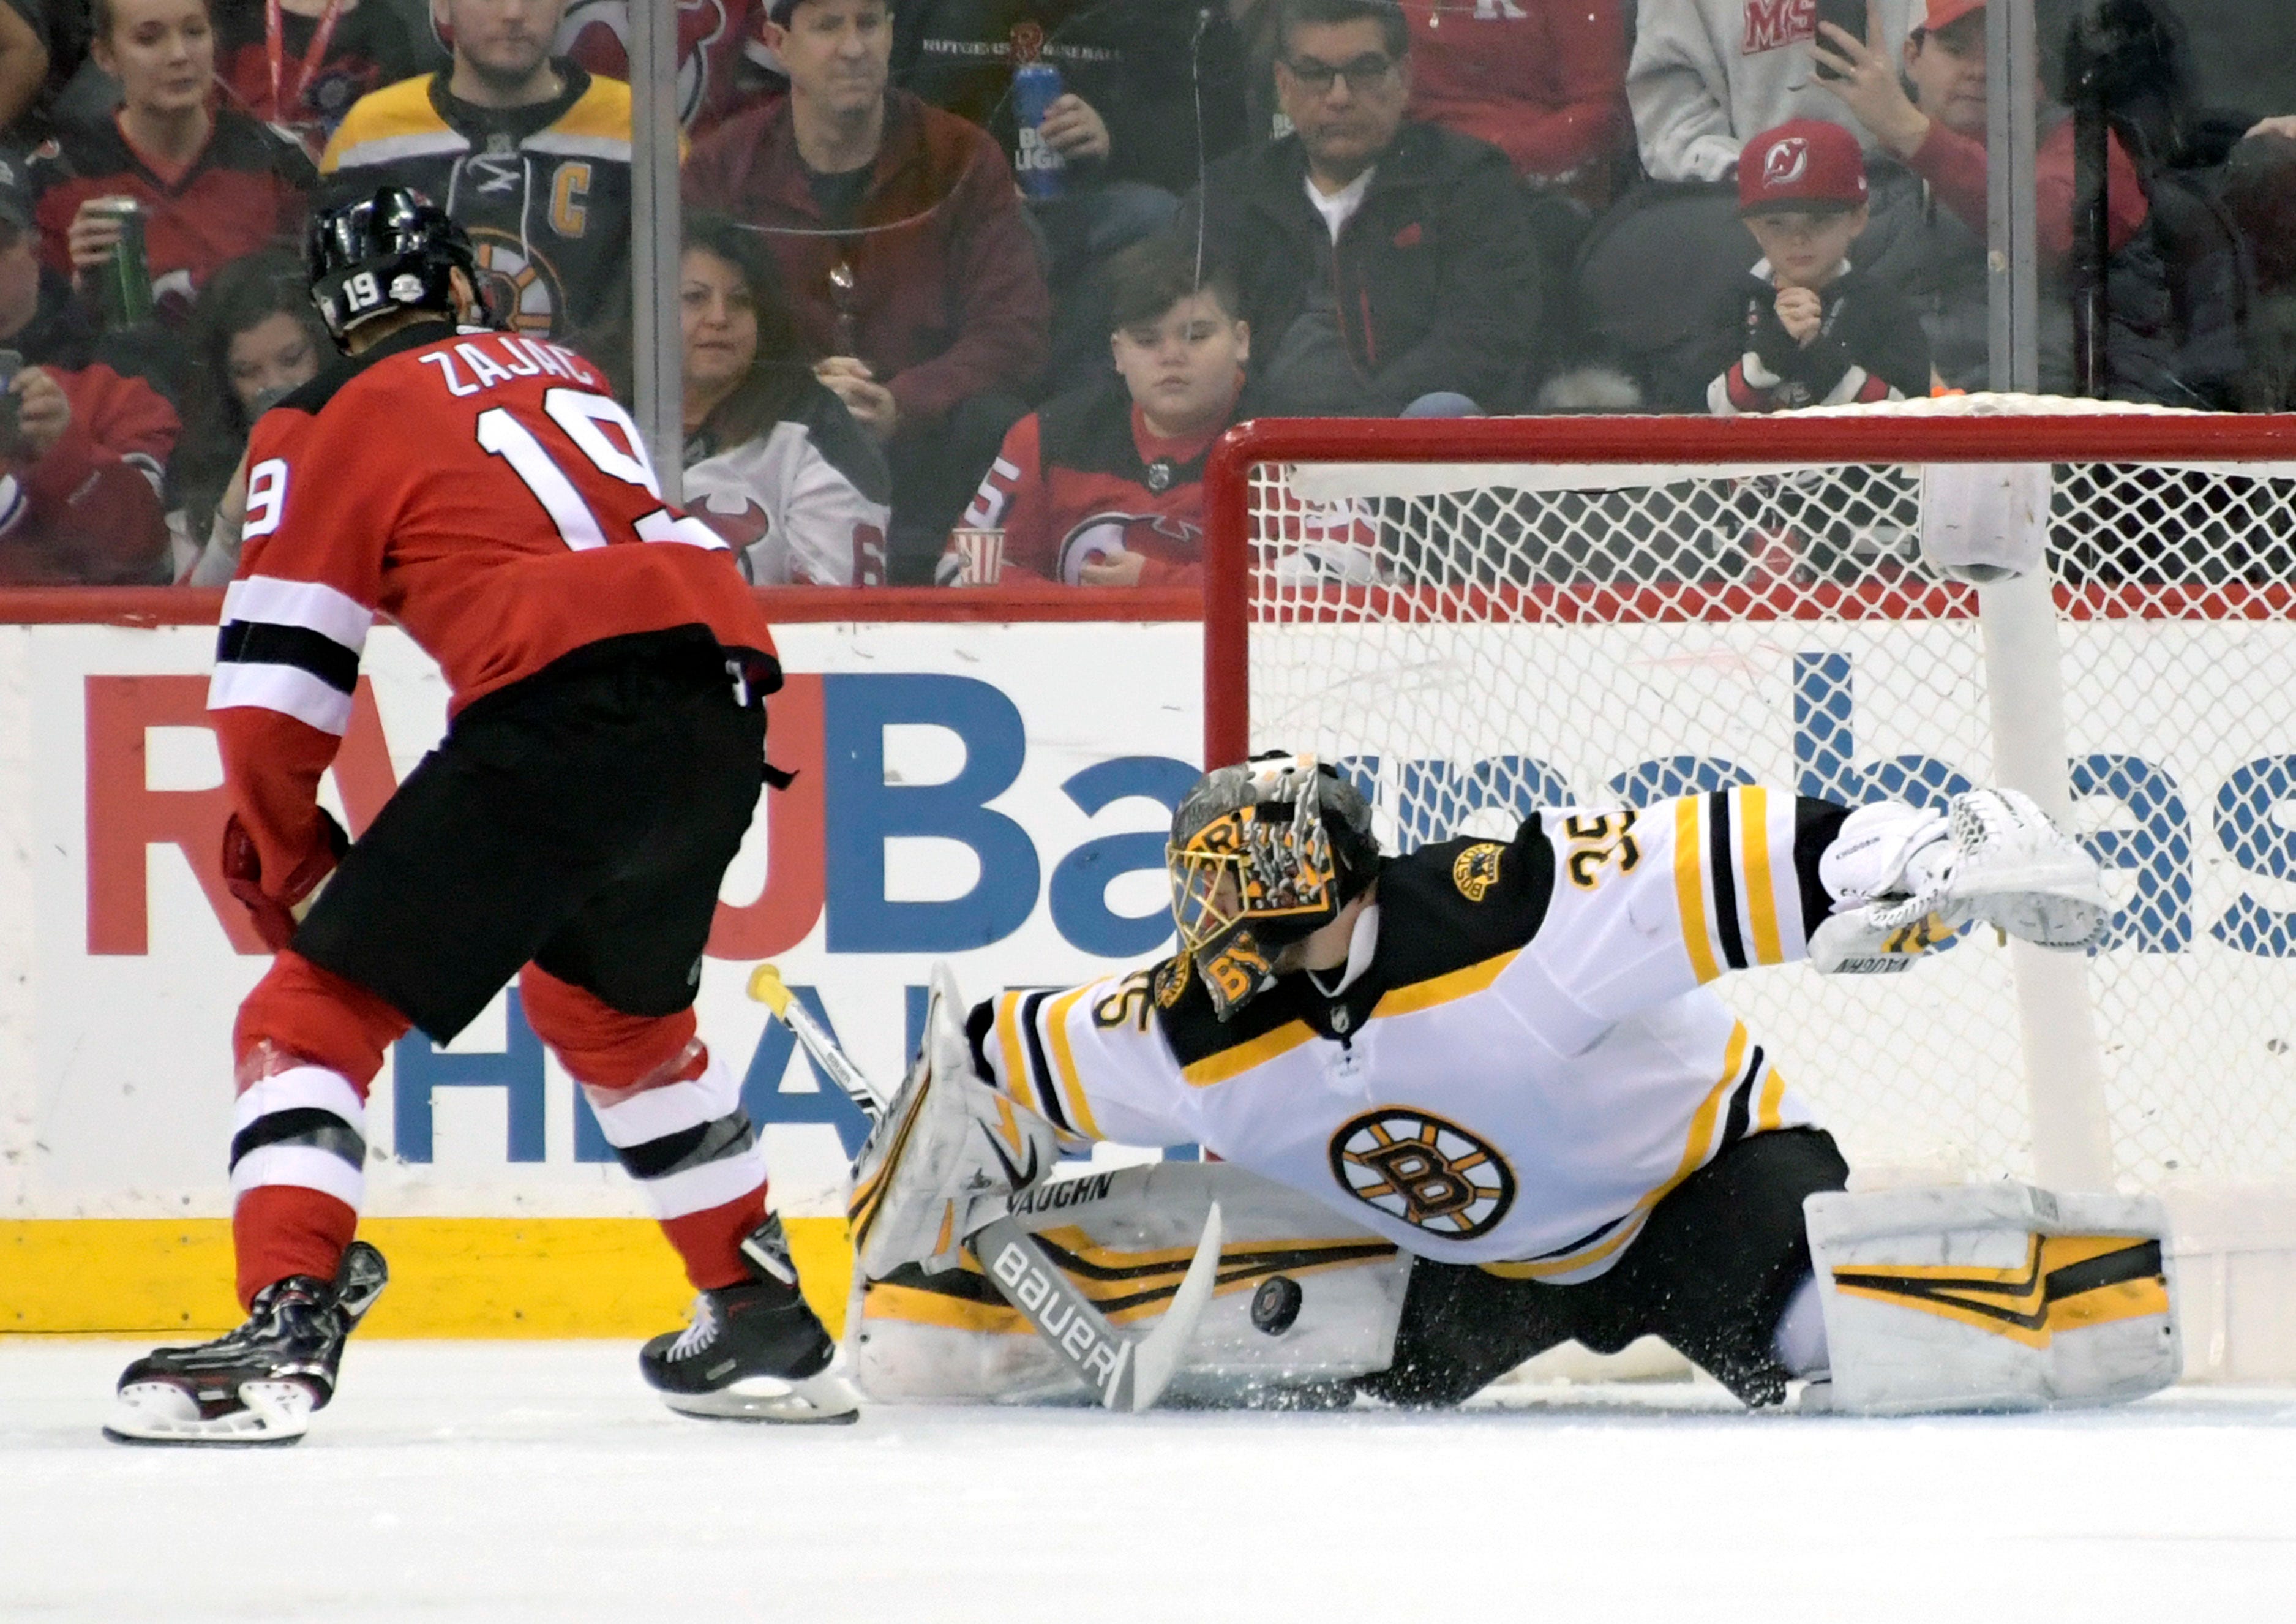 McQuaid's first goal gives Bruins win over Devils